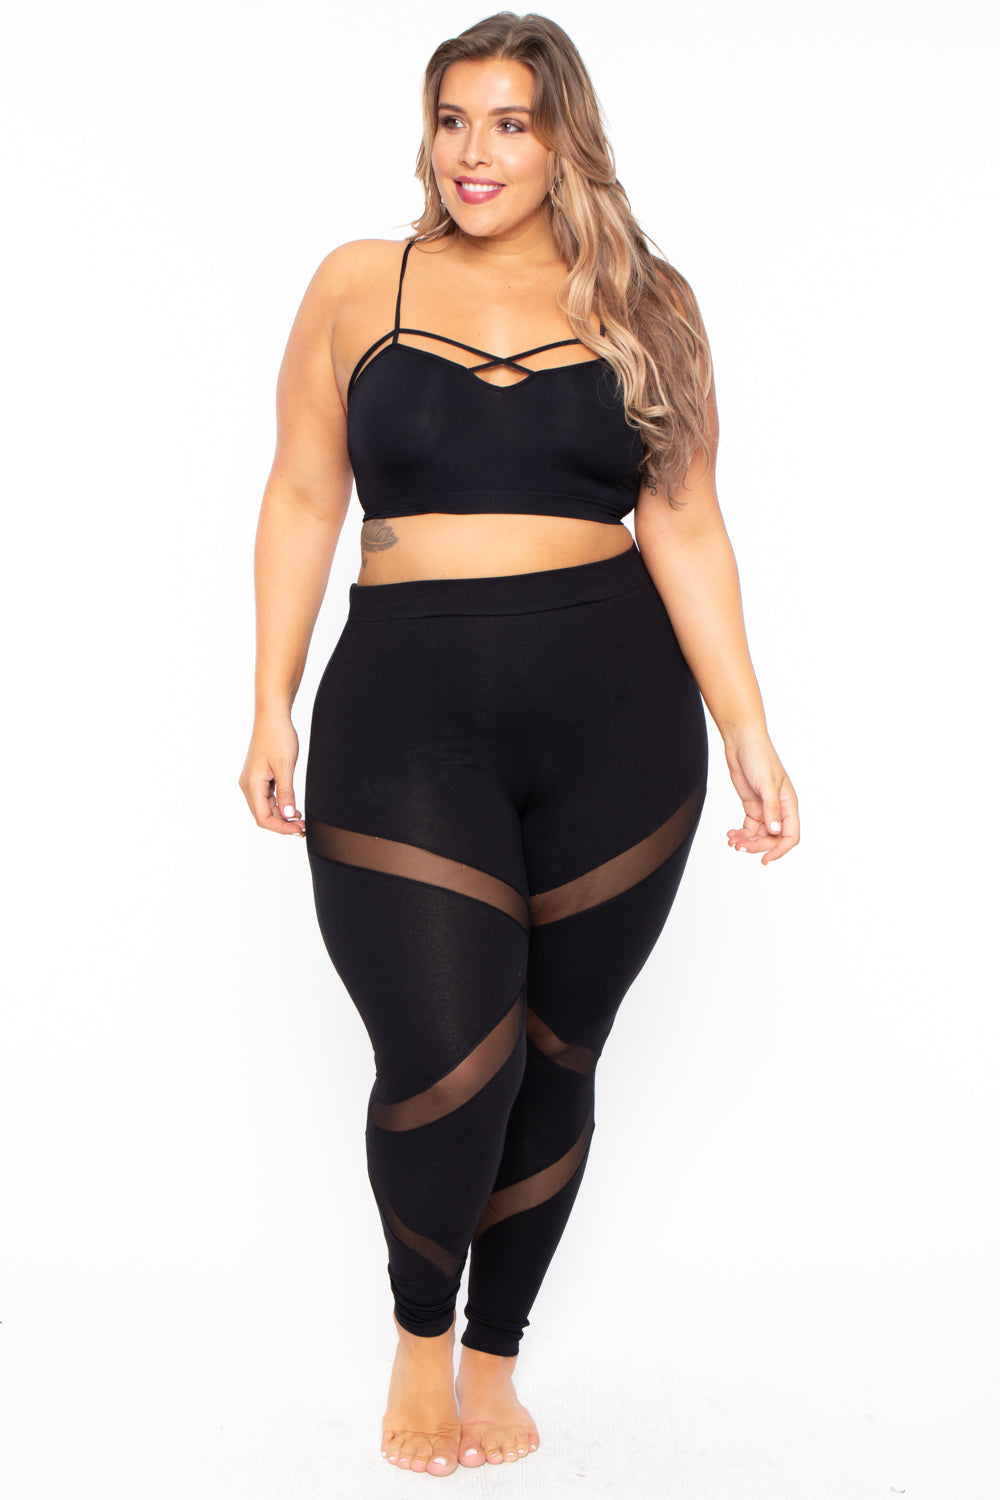  Plus Size Leggings For Women-Stretchy X-Large-4X